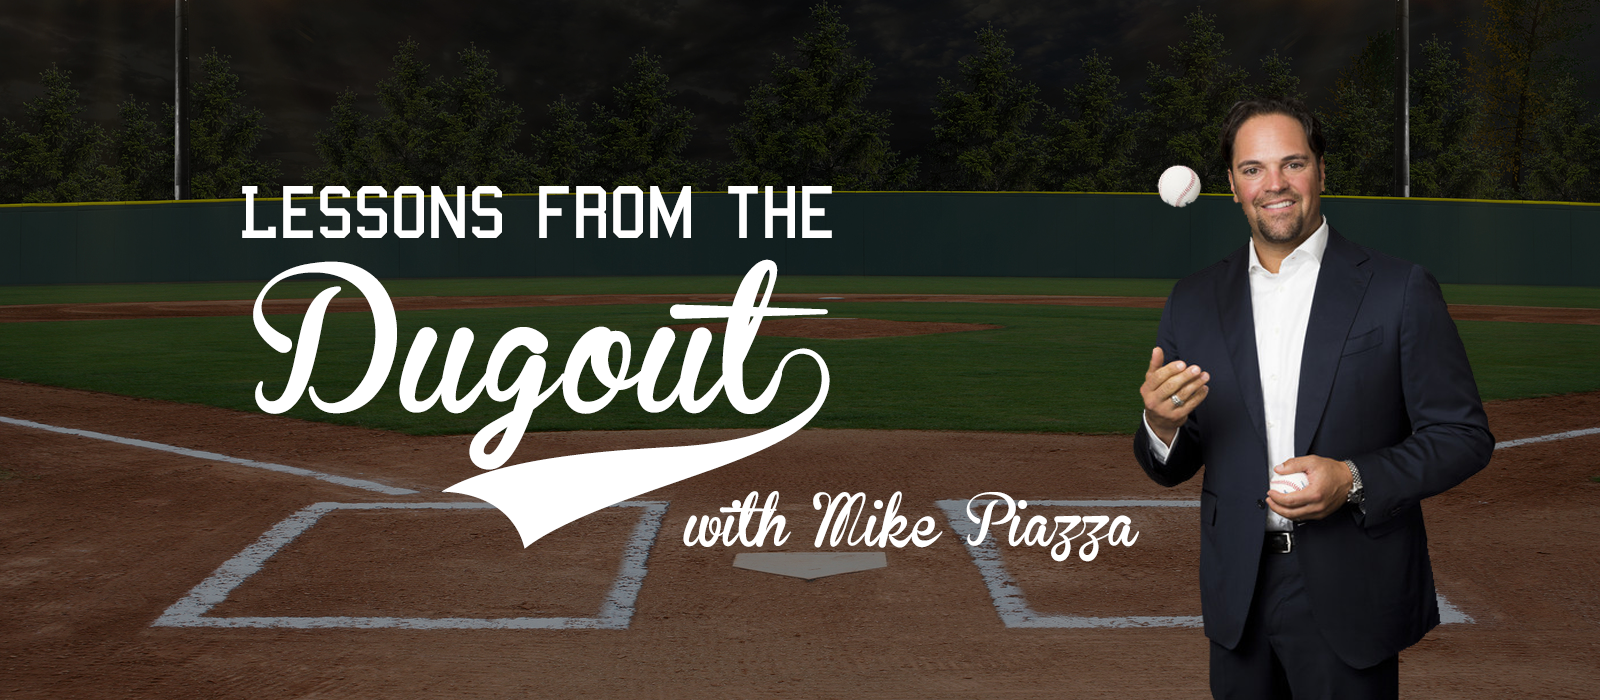 Lessons from the Dugout